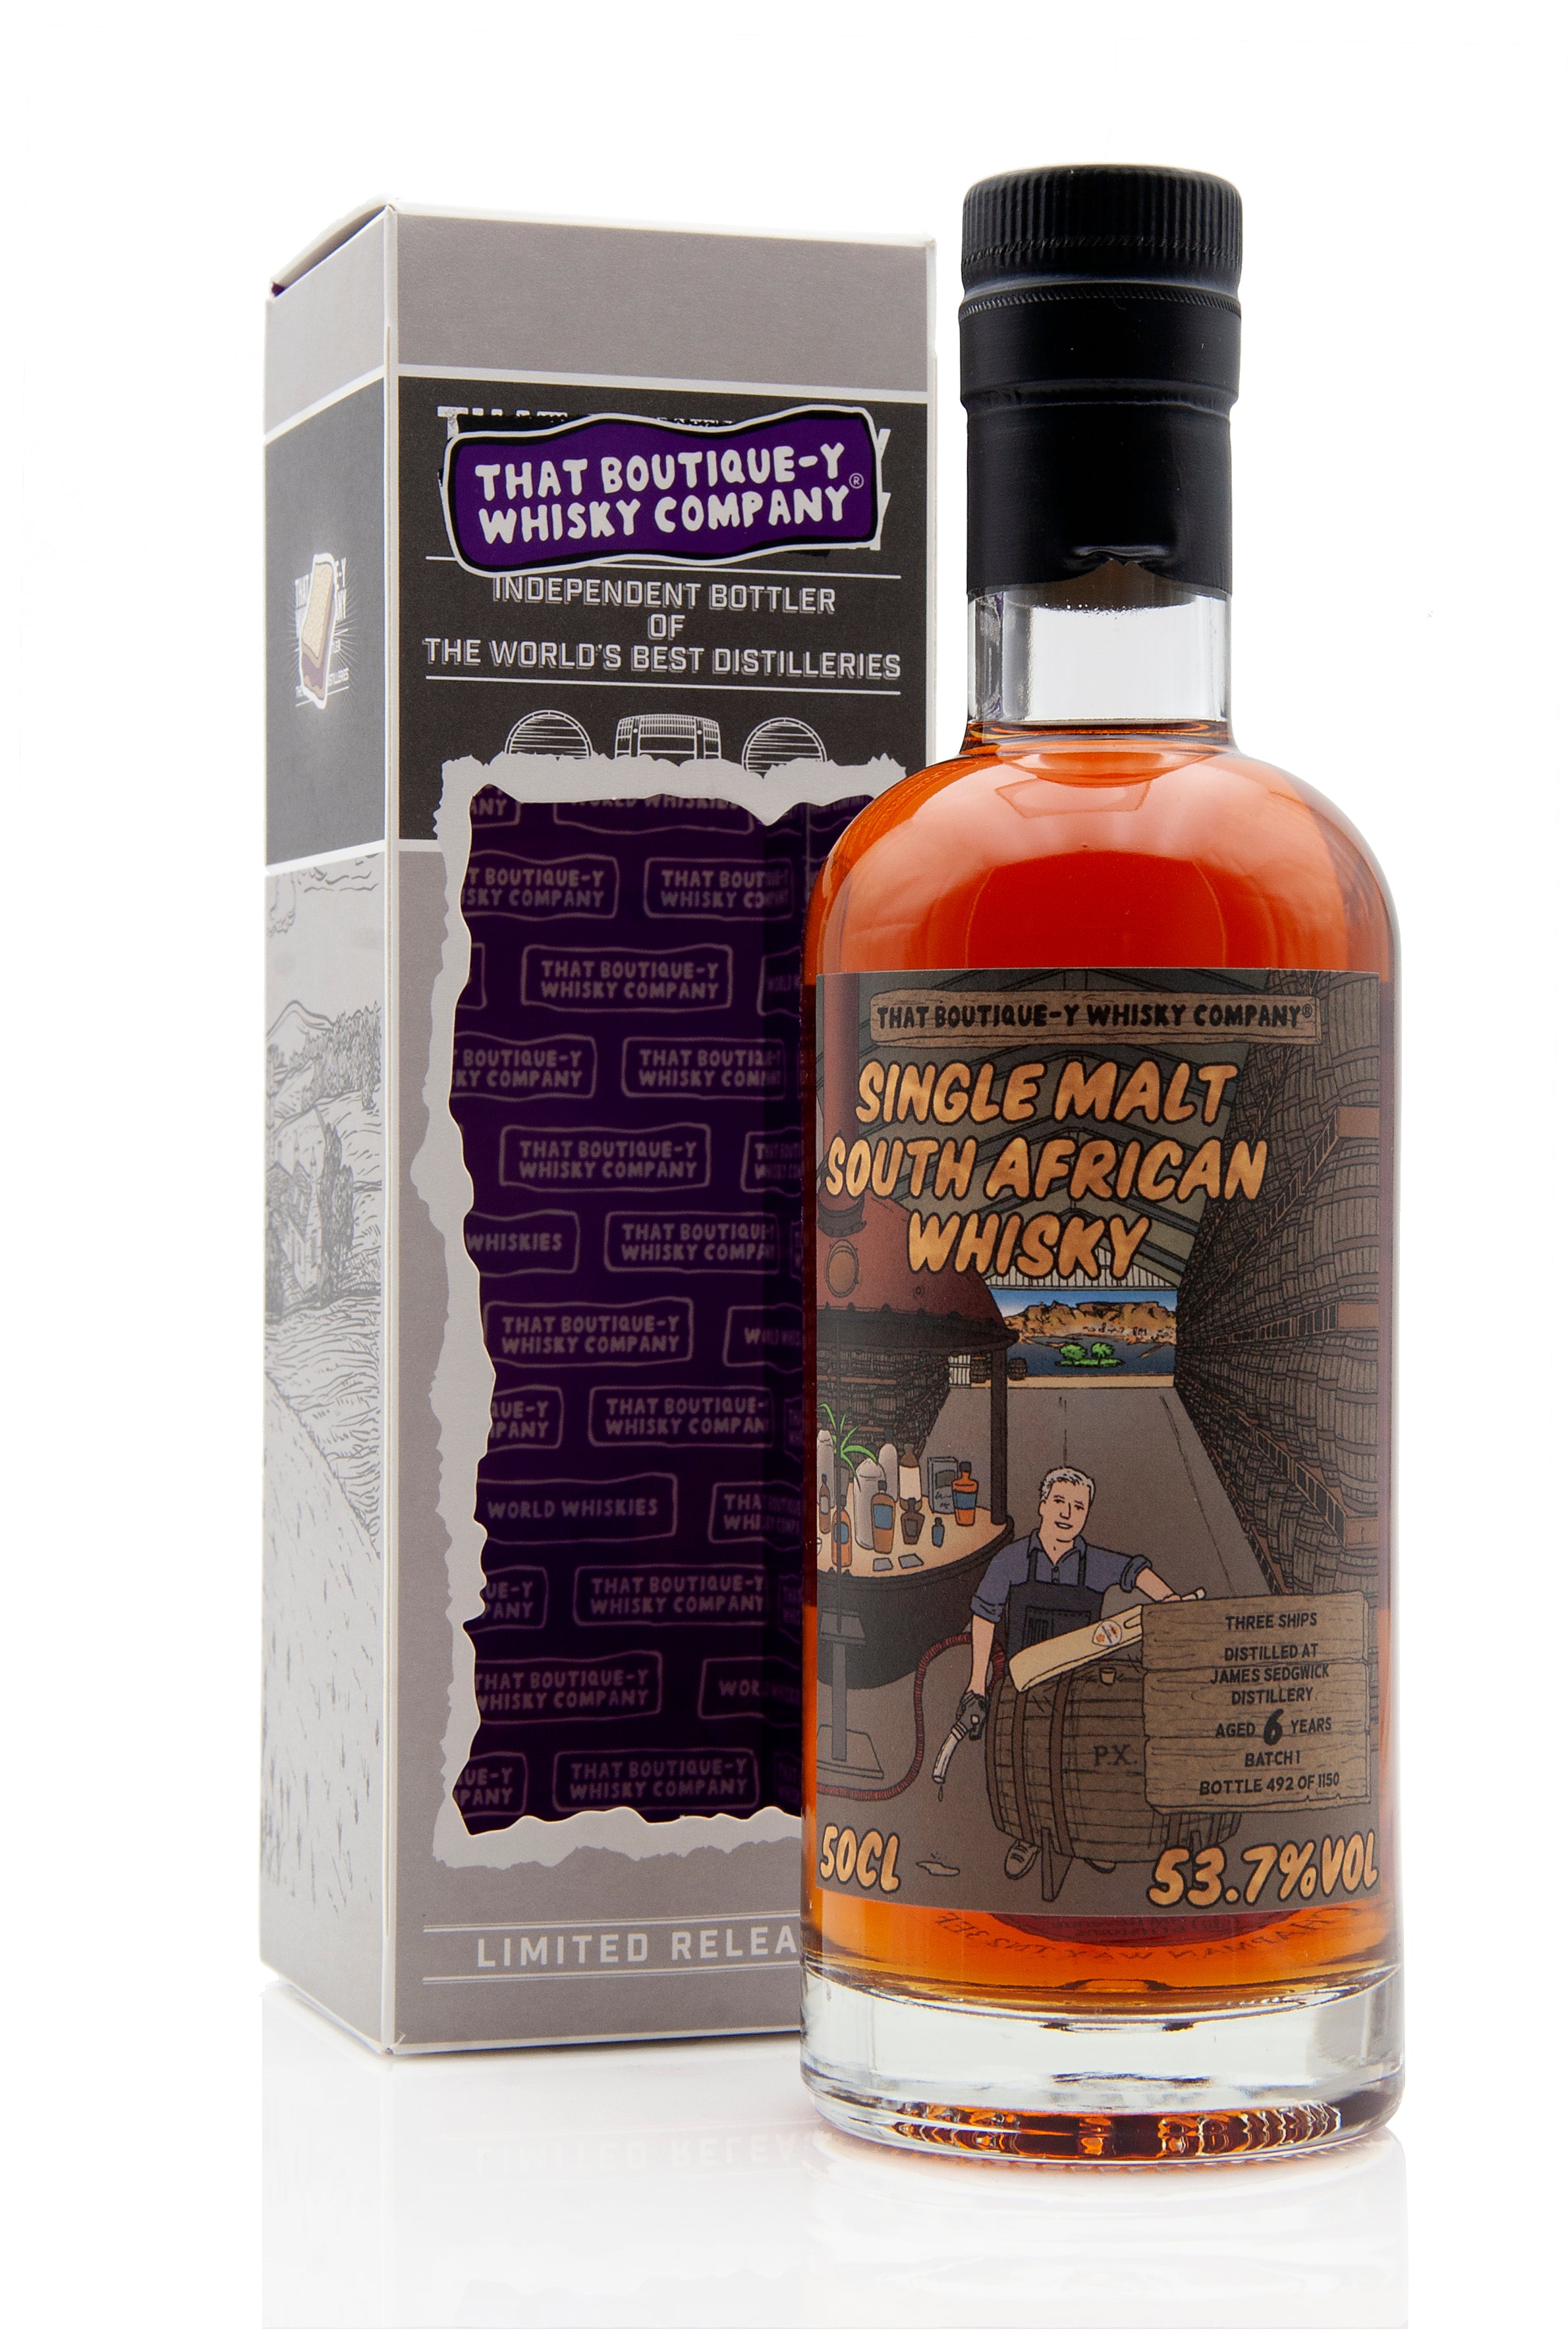 Three Ships 6 Year Old (That Boutique-y Whisky Company) | Abbey Whisky Online